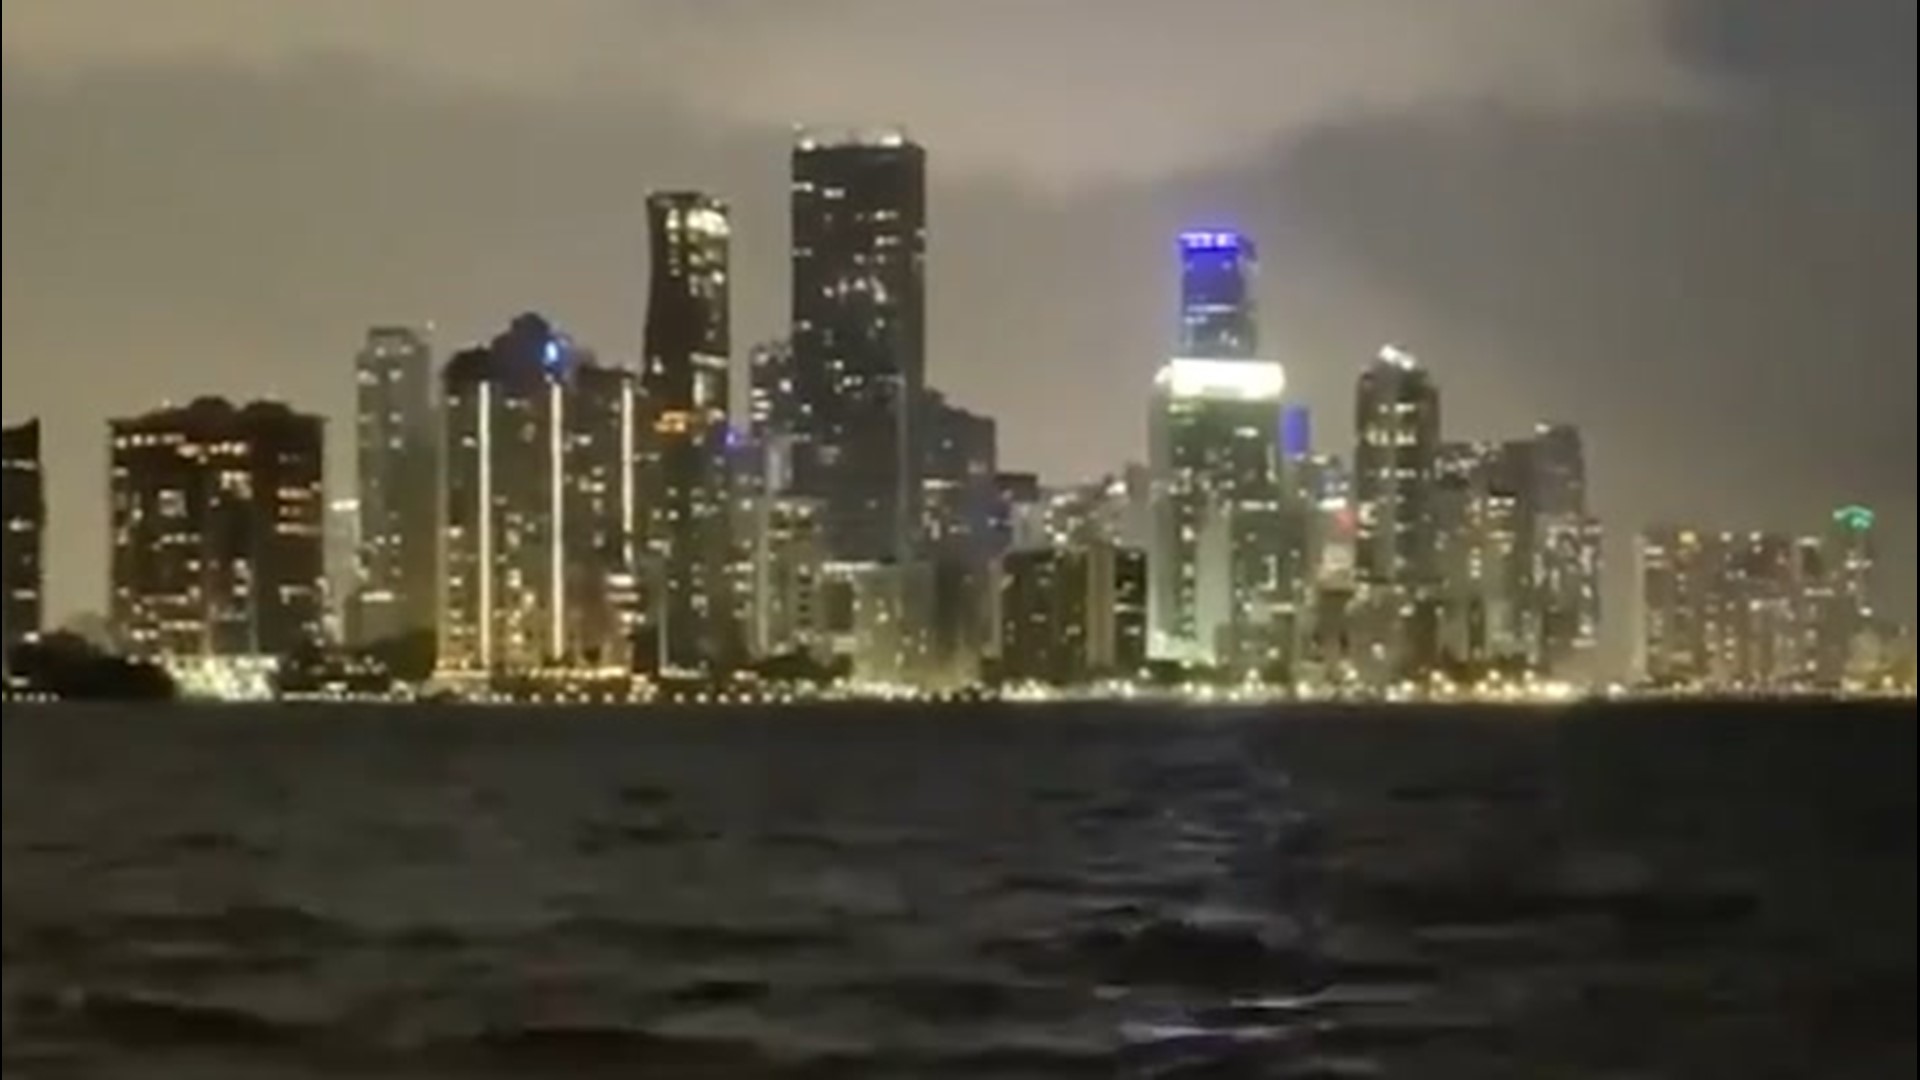 As Hurricane Isaias edged closer and closer to Miami, Florida, on Aug. 1, the lights of the city still shined.